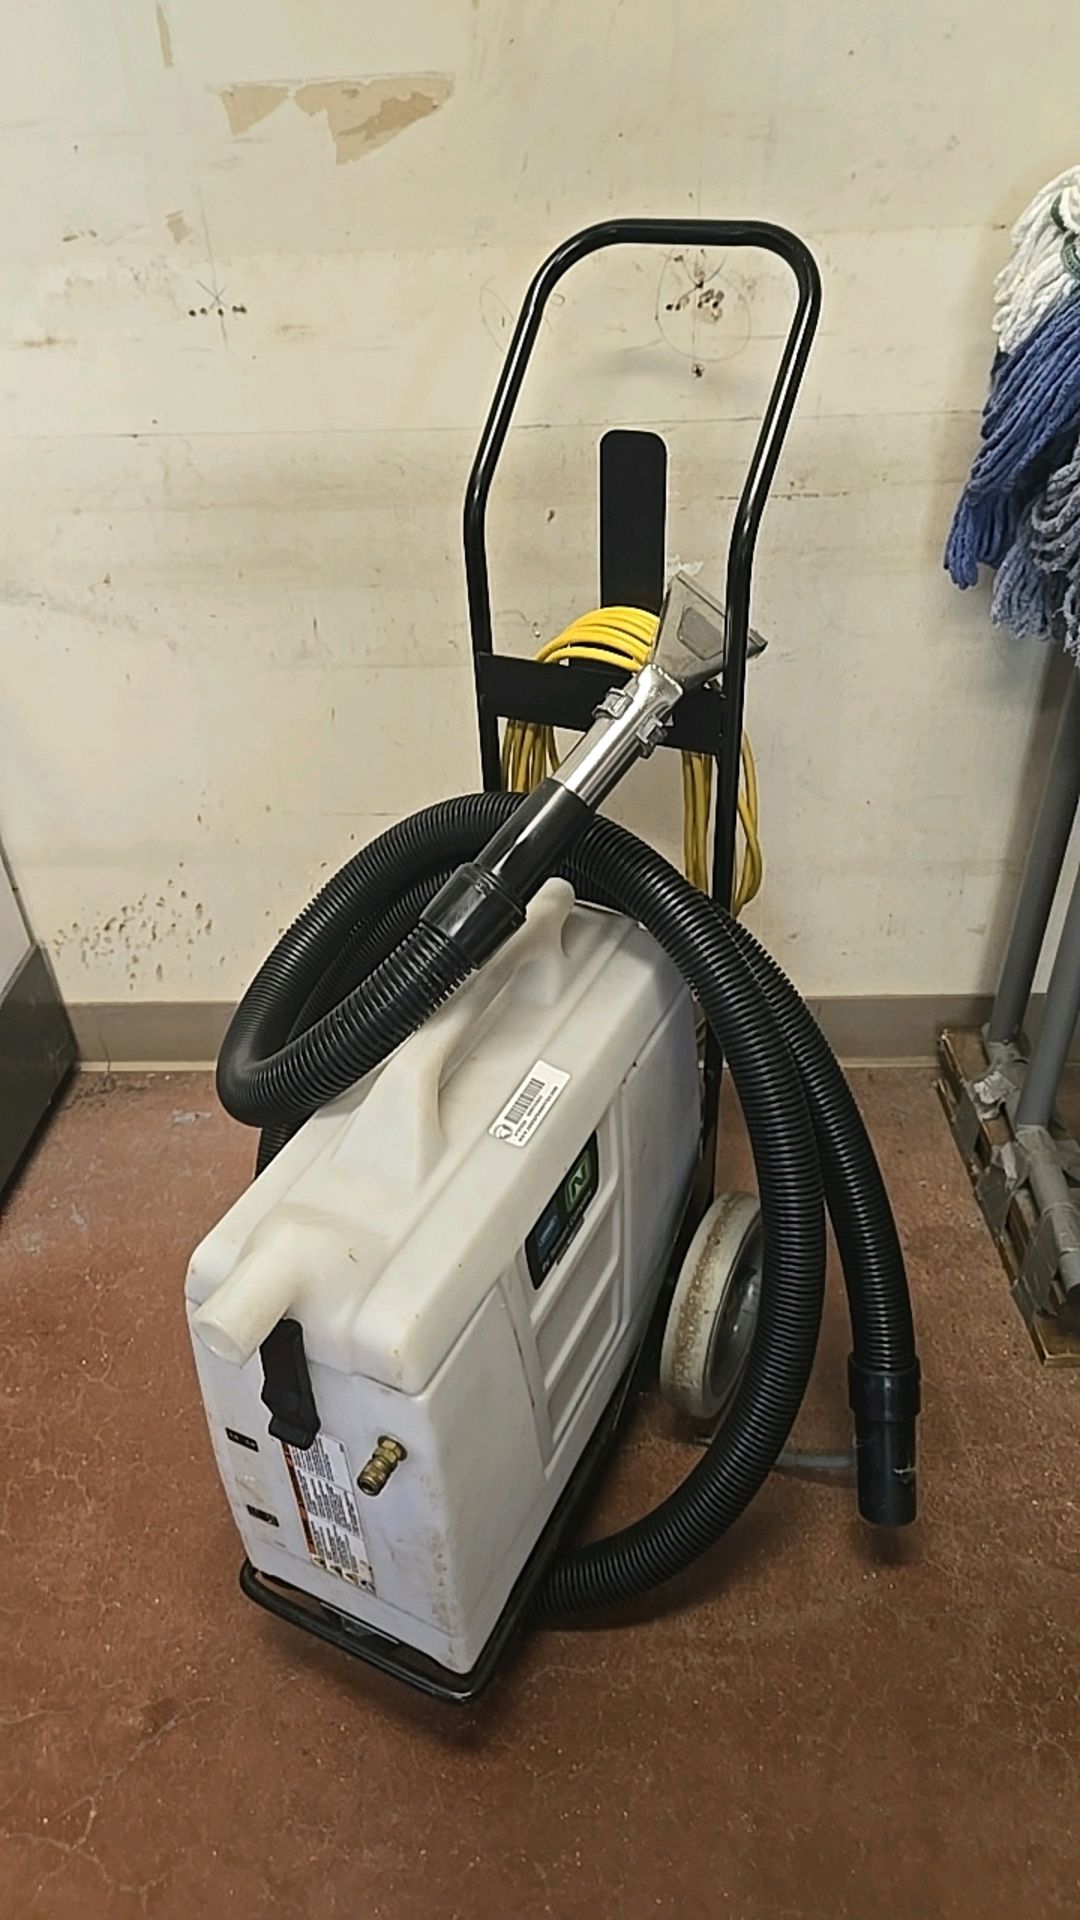 TENNANT CARPET EXTRACTOR - Image 2 of 2